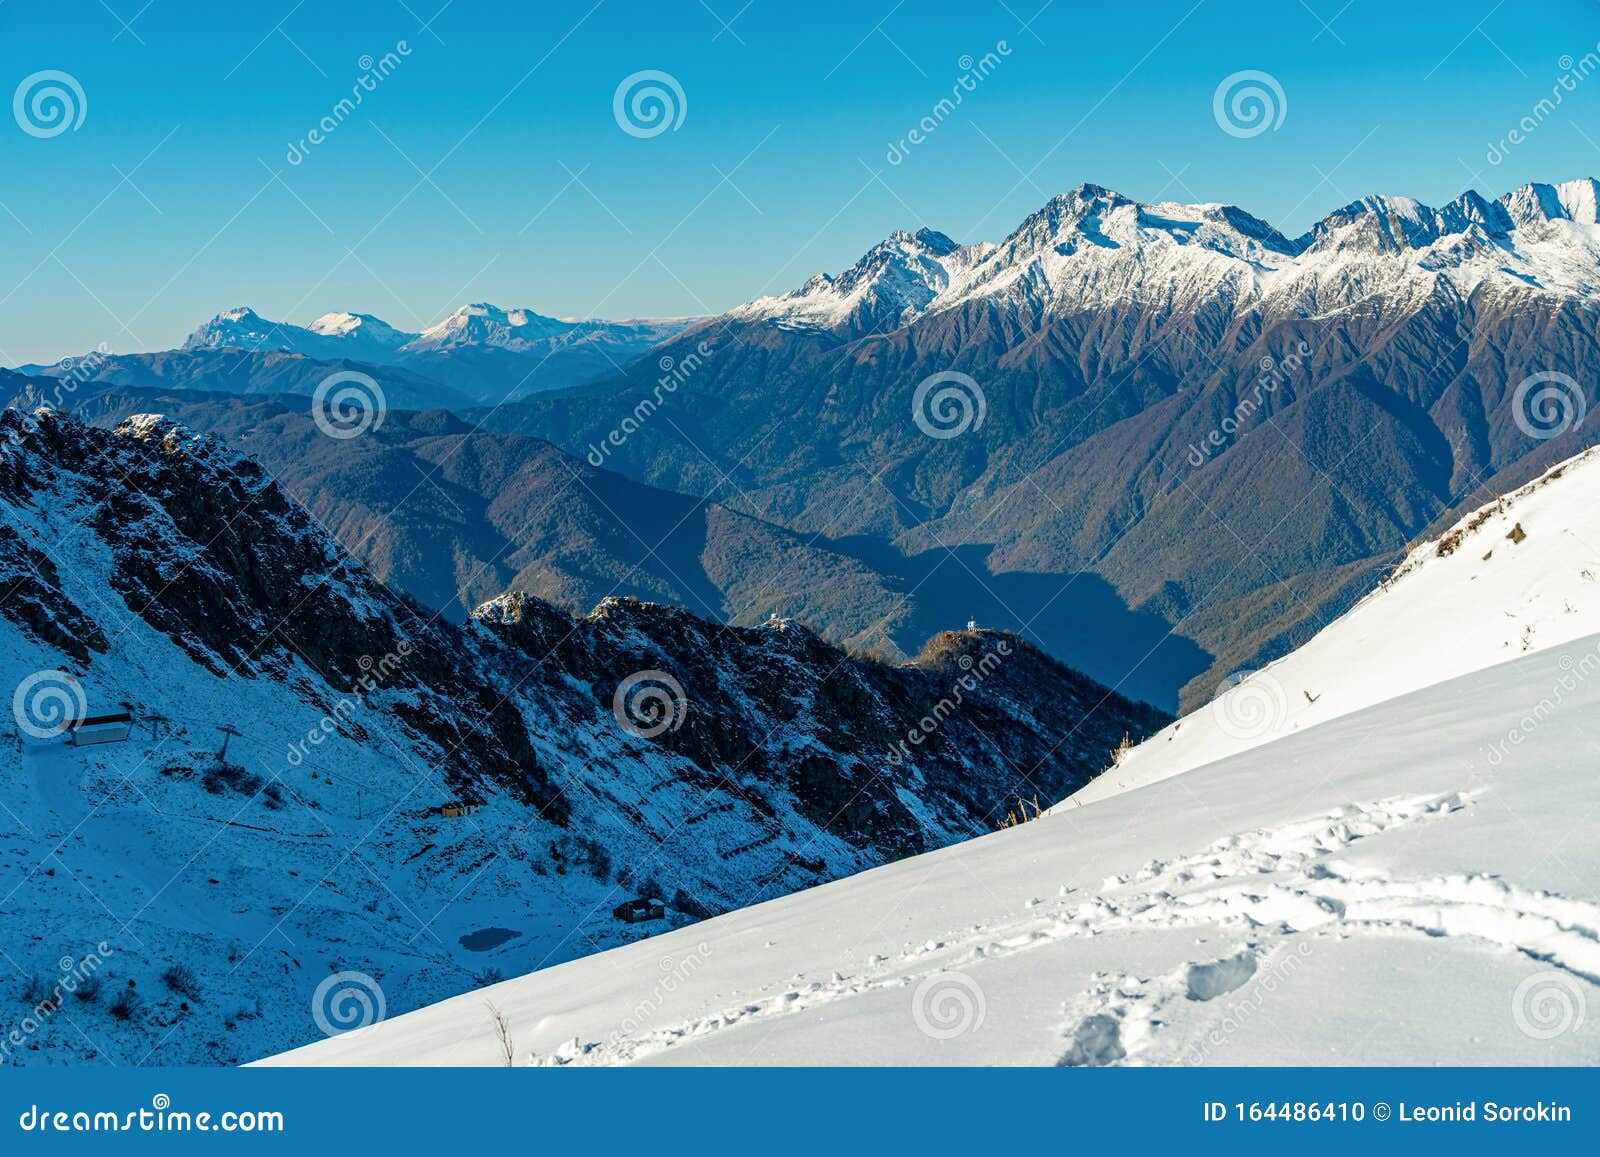 Snow Capped Peaks In The Rocky Mountains Stock Photo Image Of White